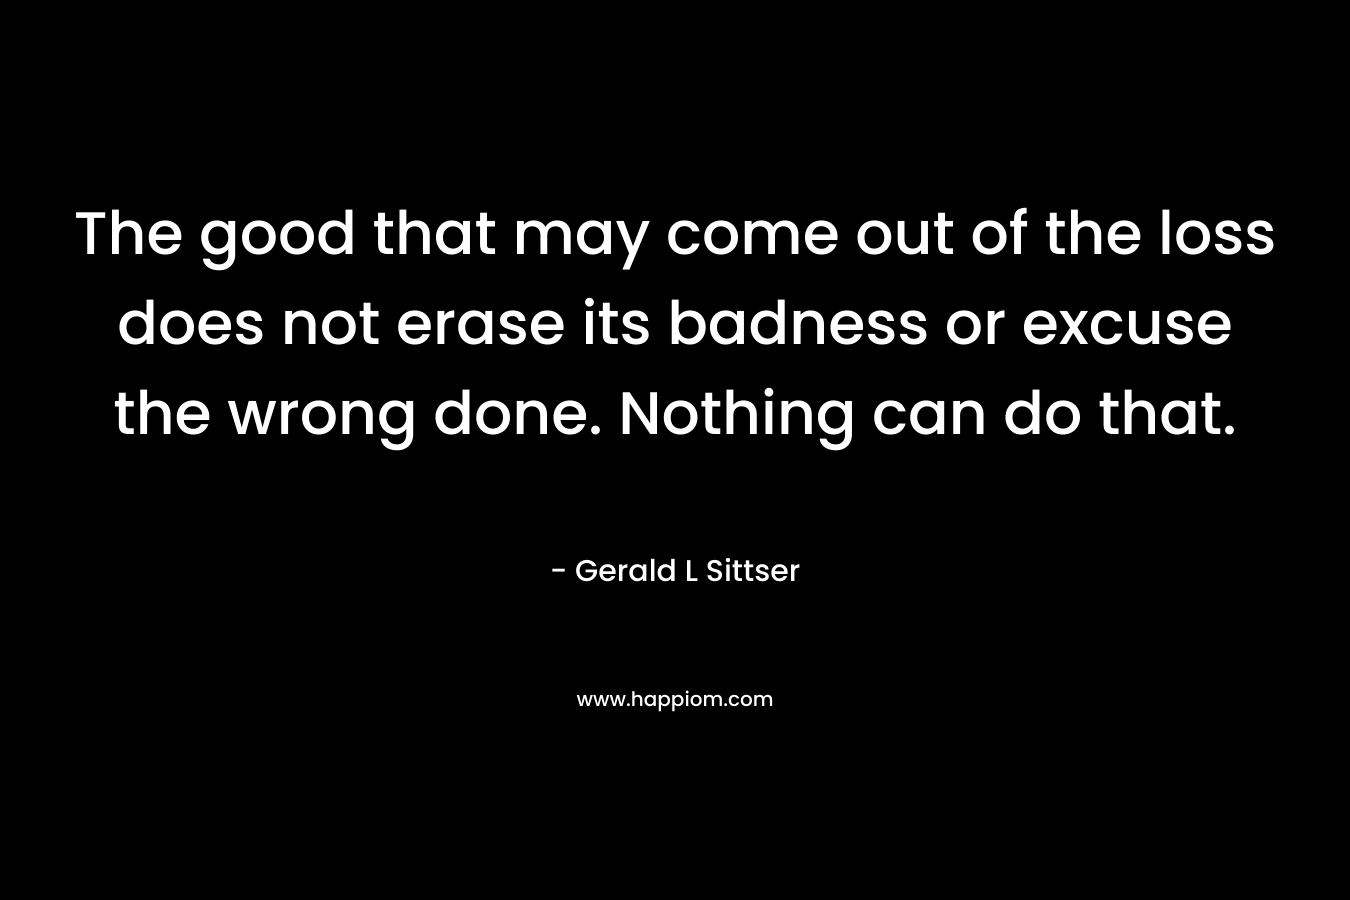 The good that may come out of the loss does not erase its badness or excuse the wrong done. Nothing can do that. – Gerald L Sittser